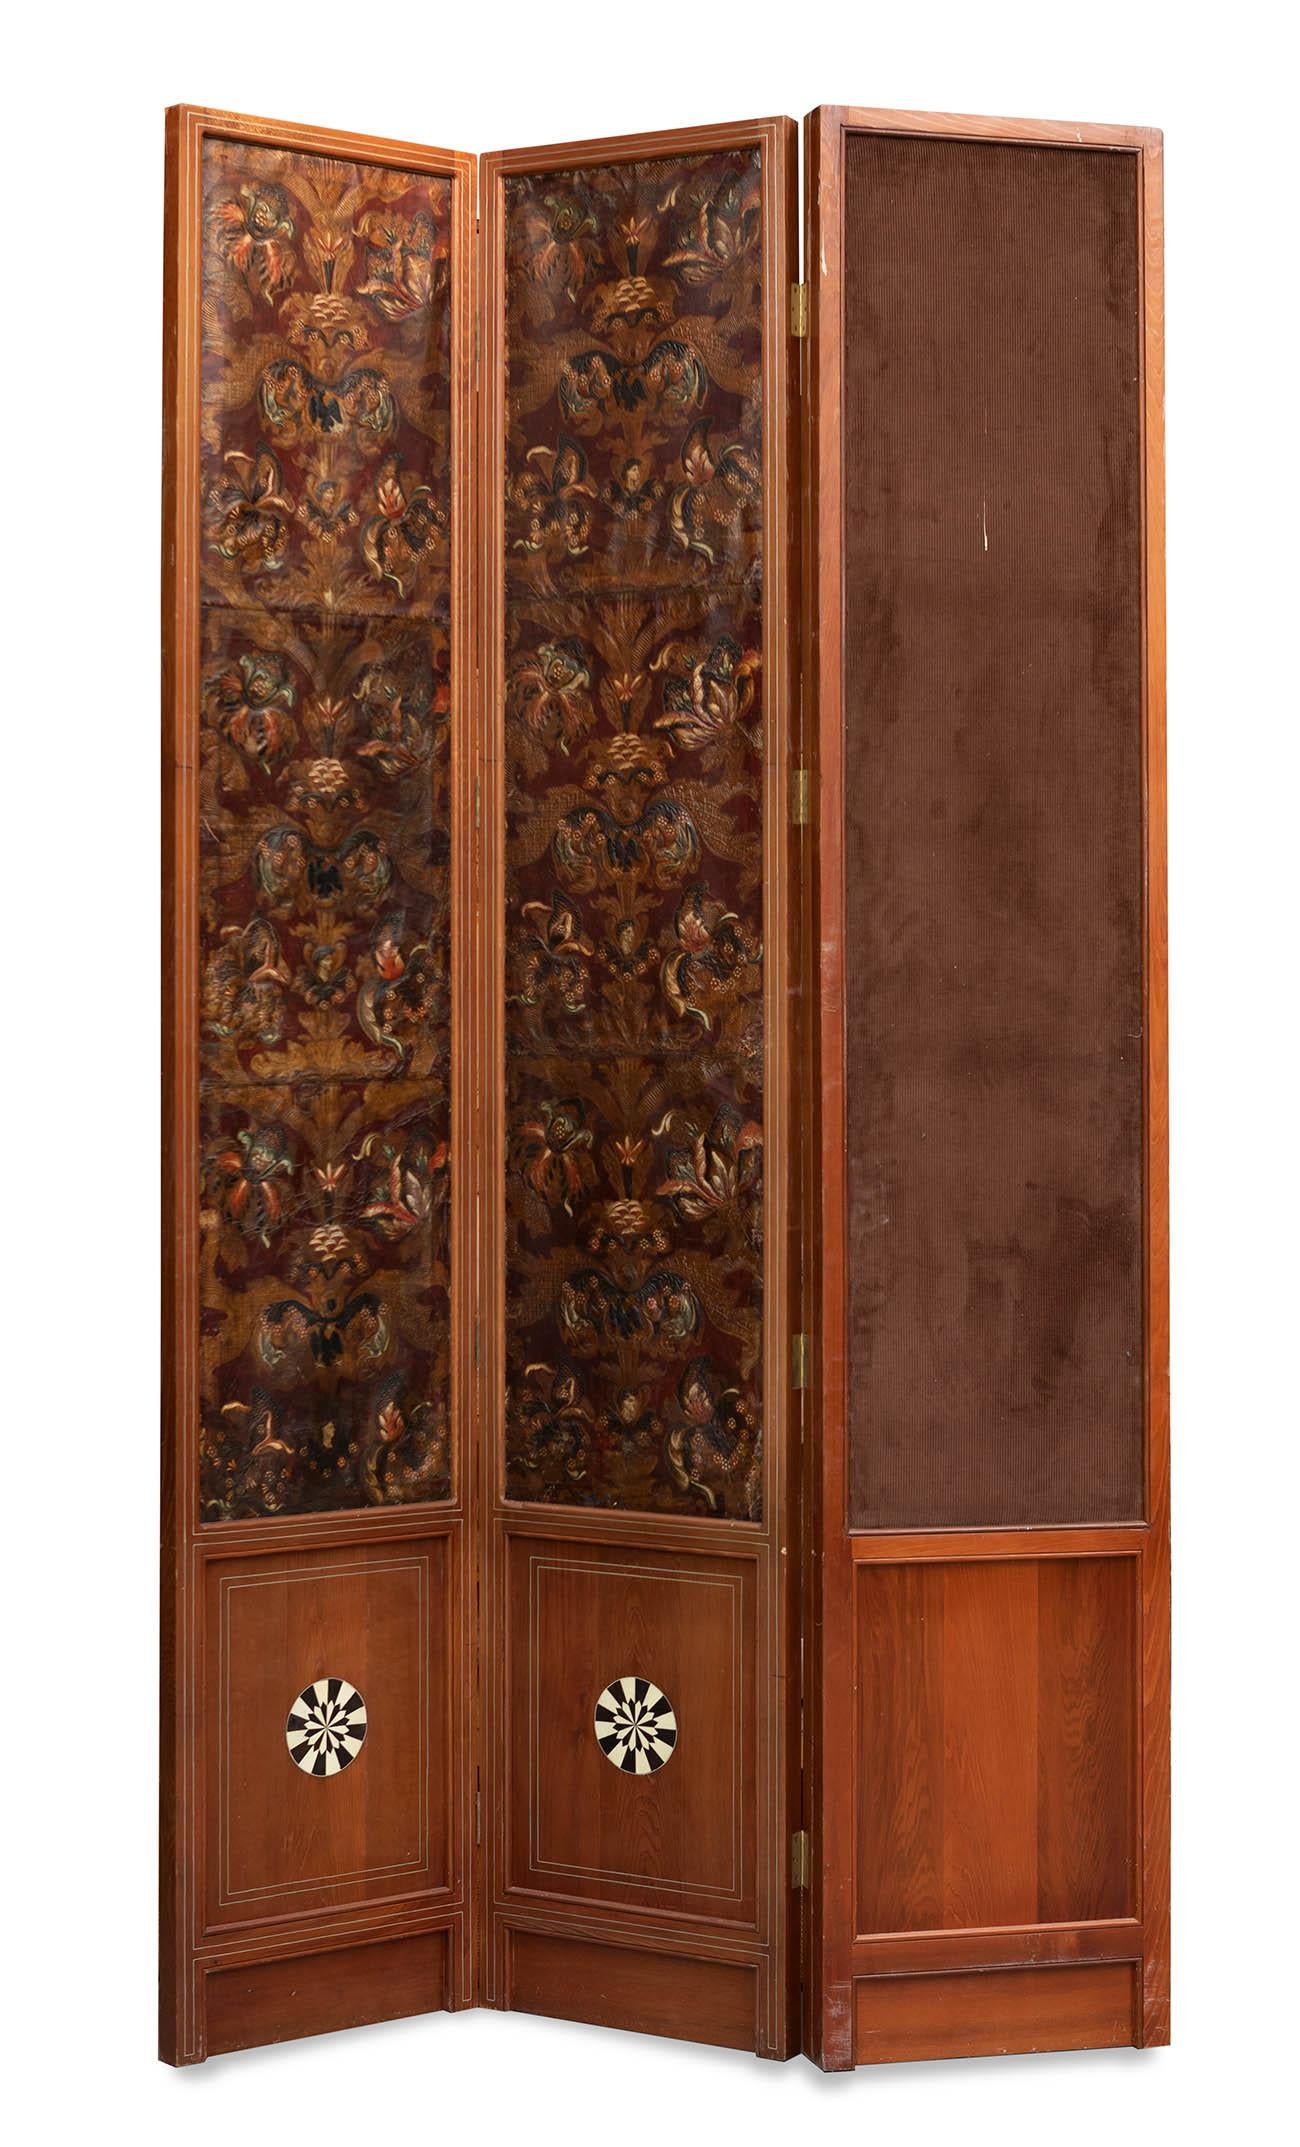 18th Century and Earlier Mid-18th Century Spanish Set of Two 4-Panel Embossed Leather Folding Screens For Sale